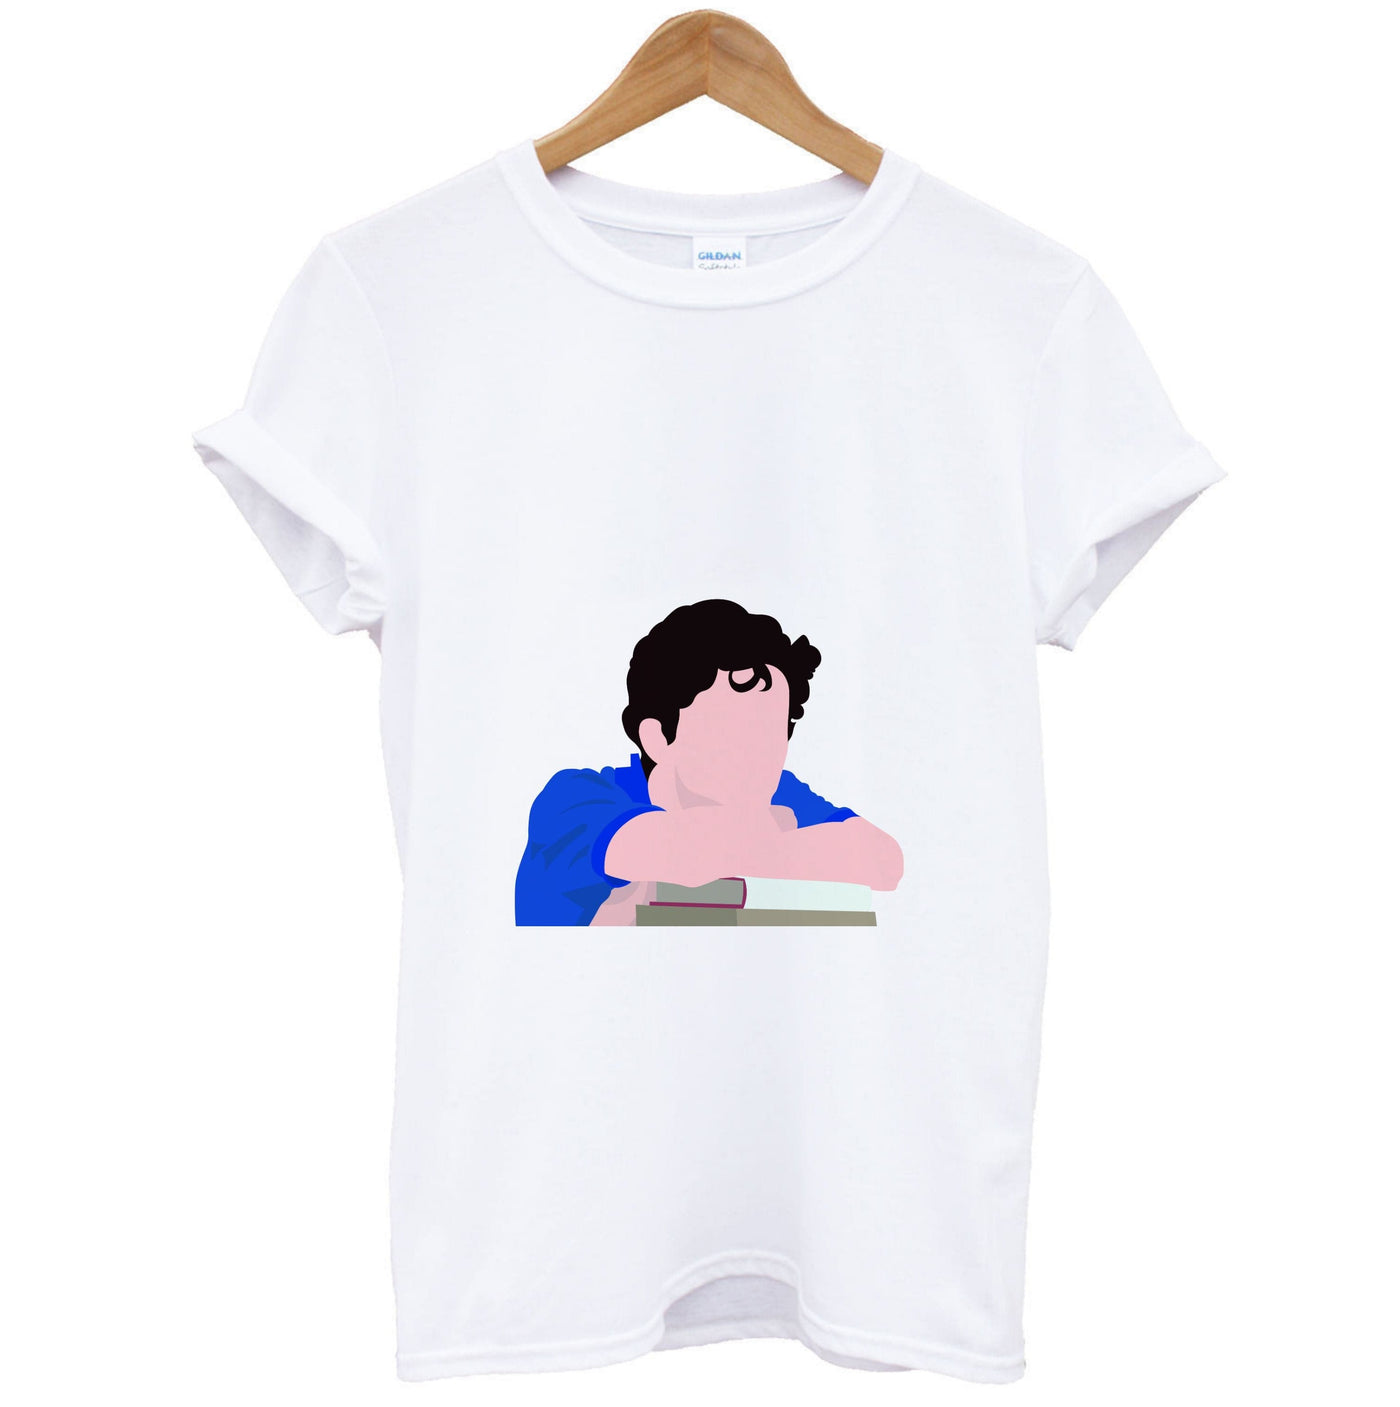 Call Me By Your Name - Timothée Chalamet T-Shirt